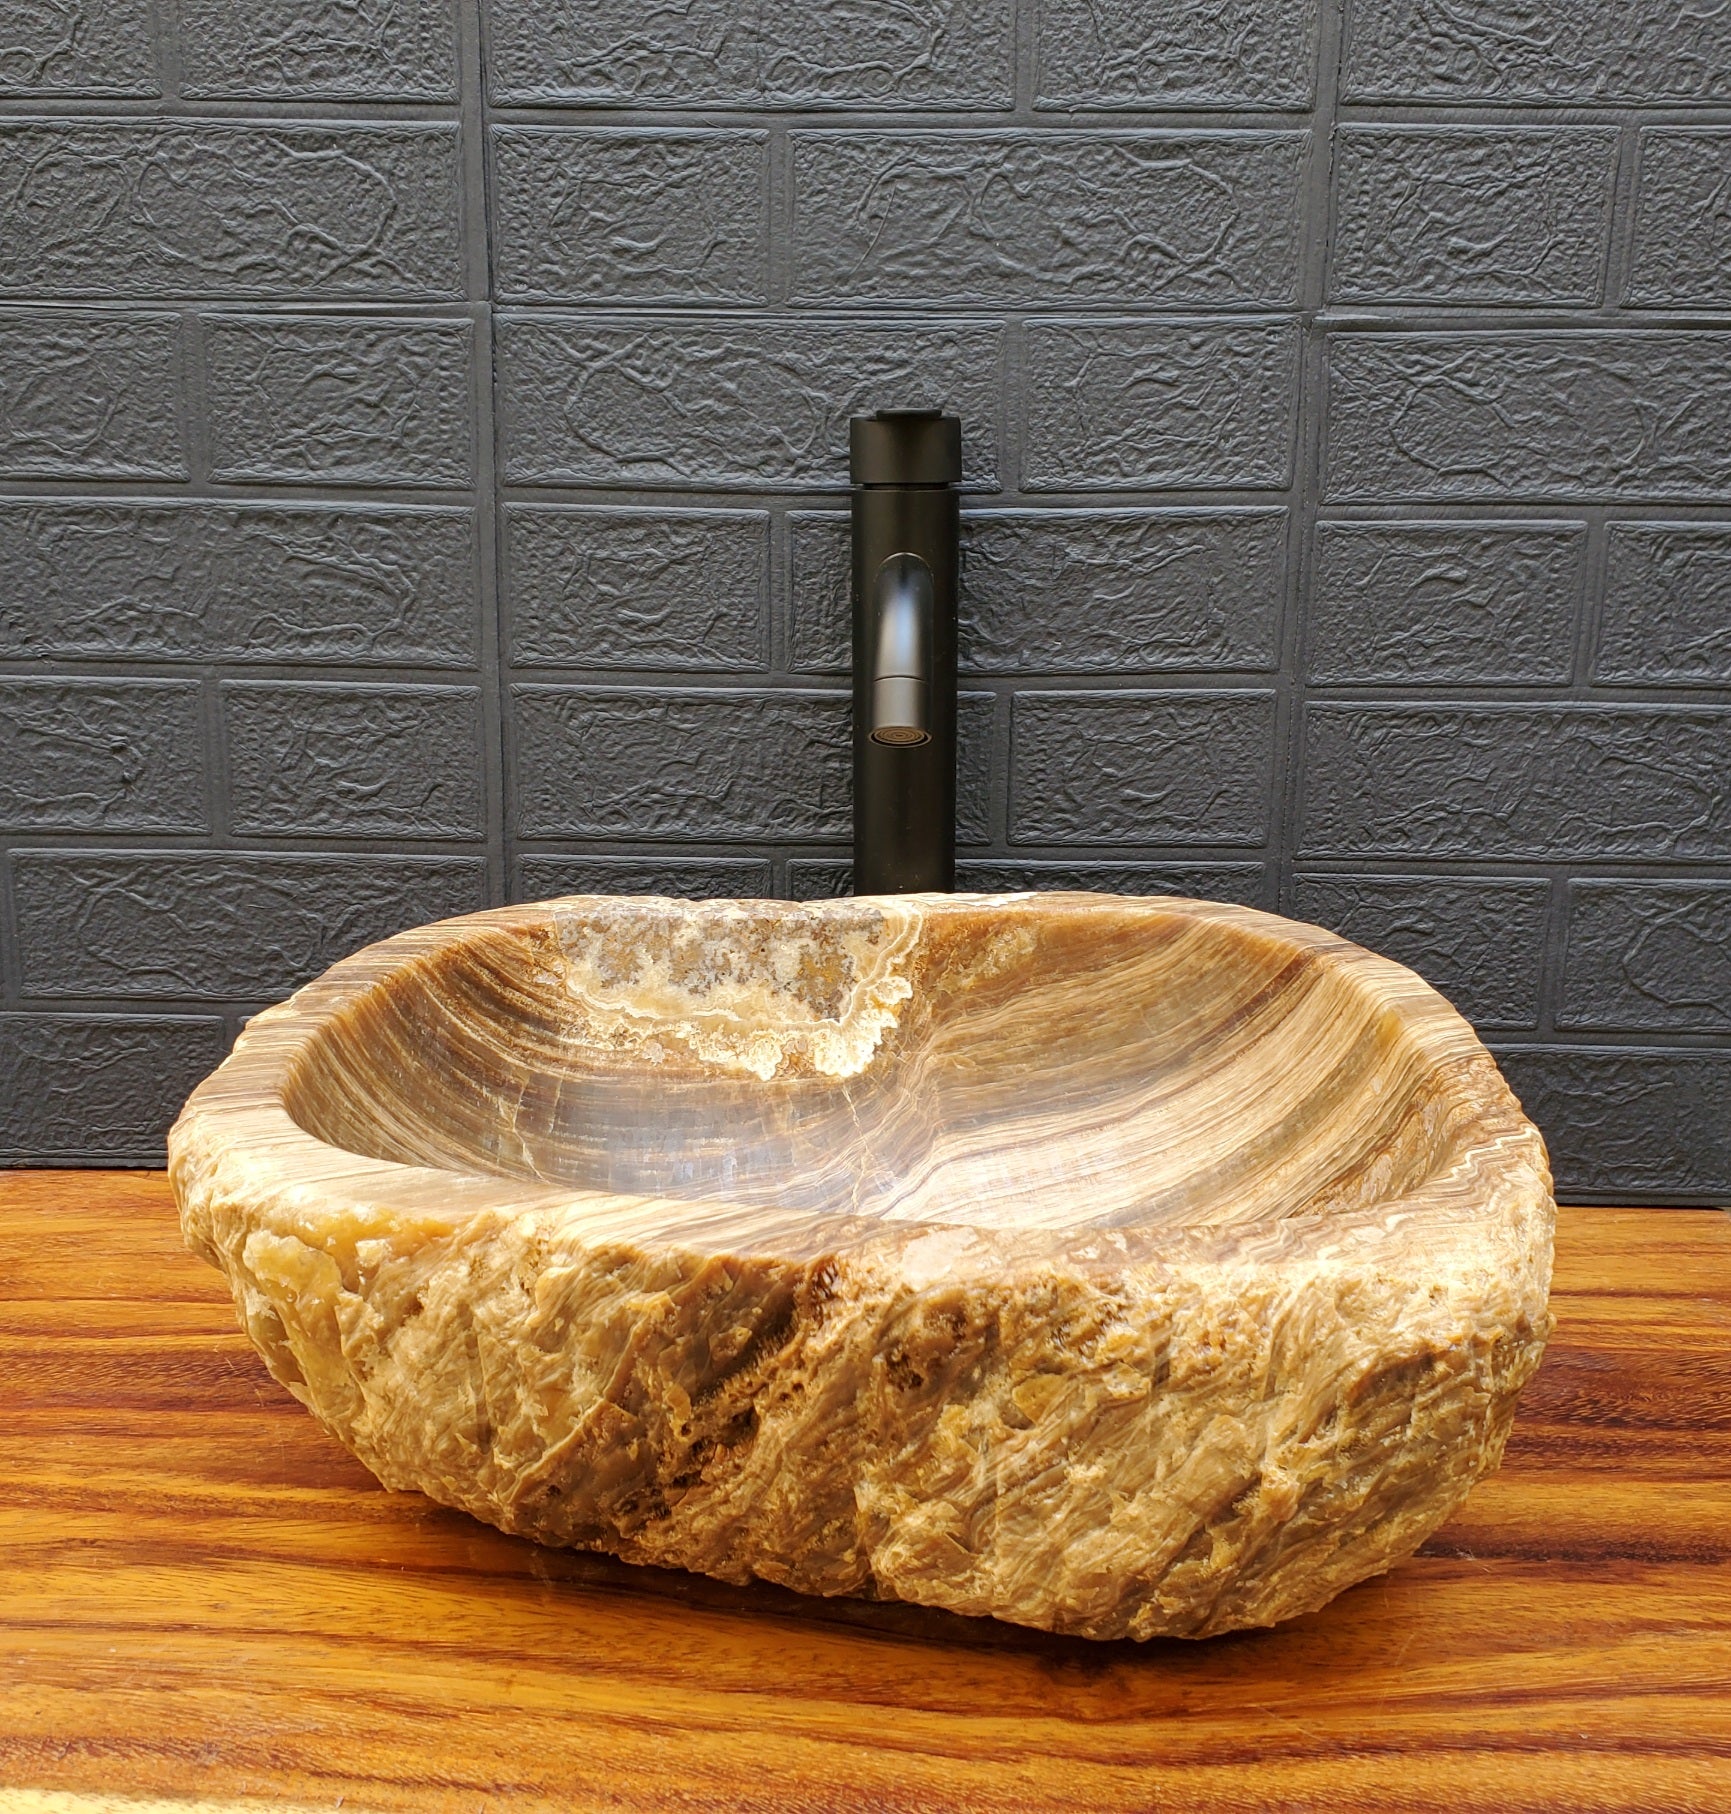 Chocolate and Tan Onyx Vessel Sink, Handmade in Mexico. Hand finished and ships from the USA. By now at www.felipenadgrace.com. 